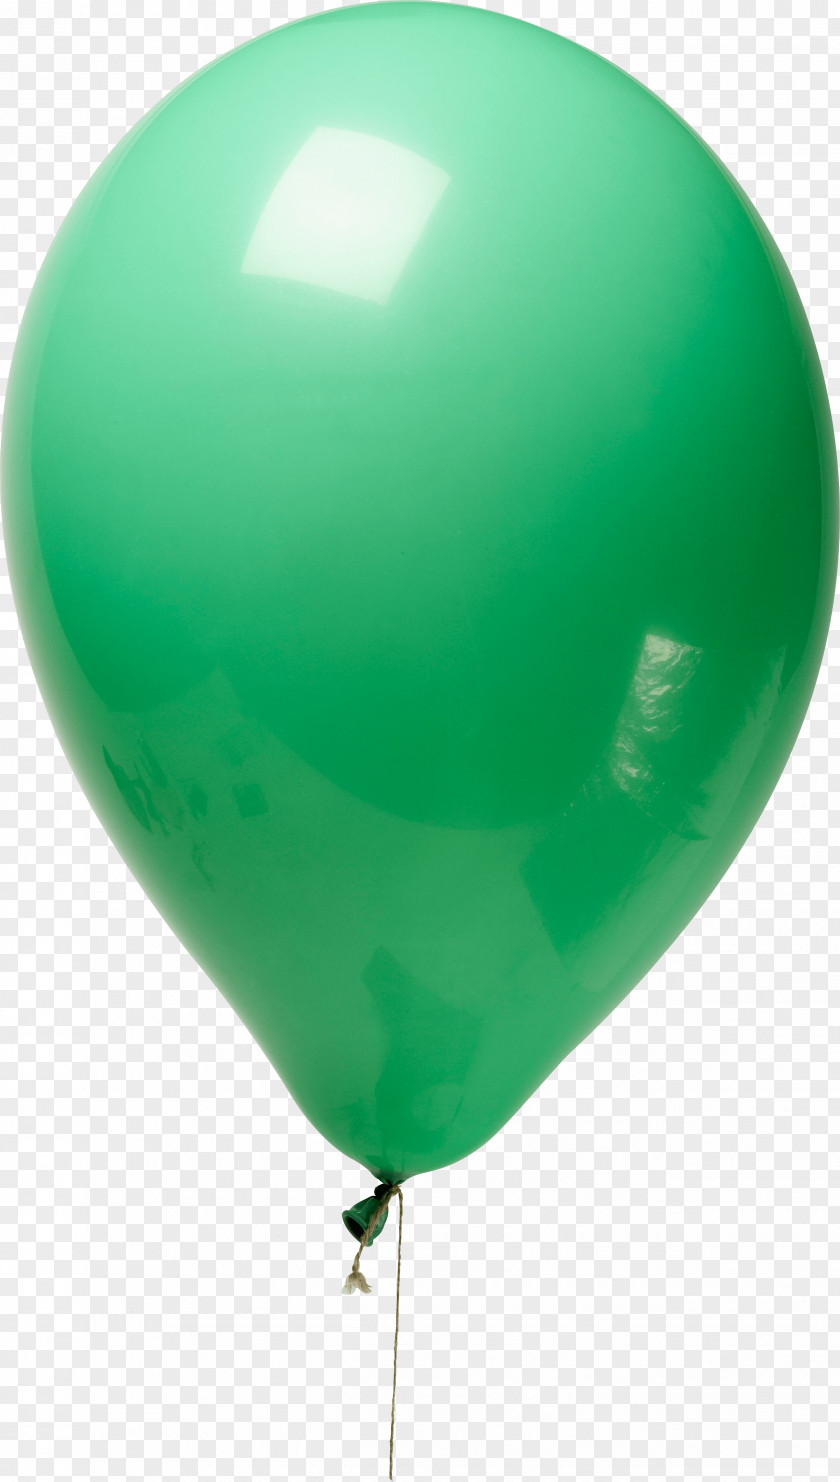 Green Balloon Image Toy Raster Graphics Clip Art PNG